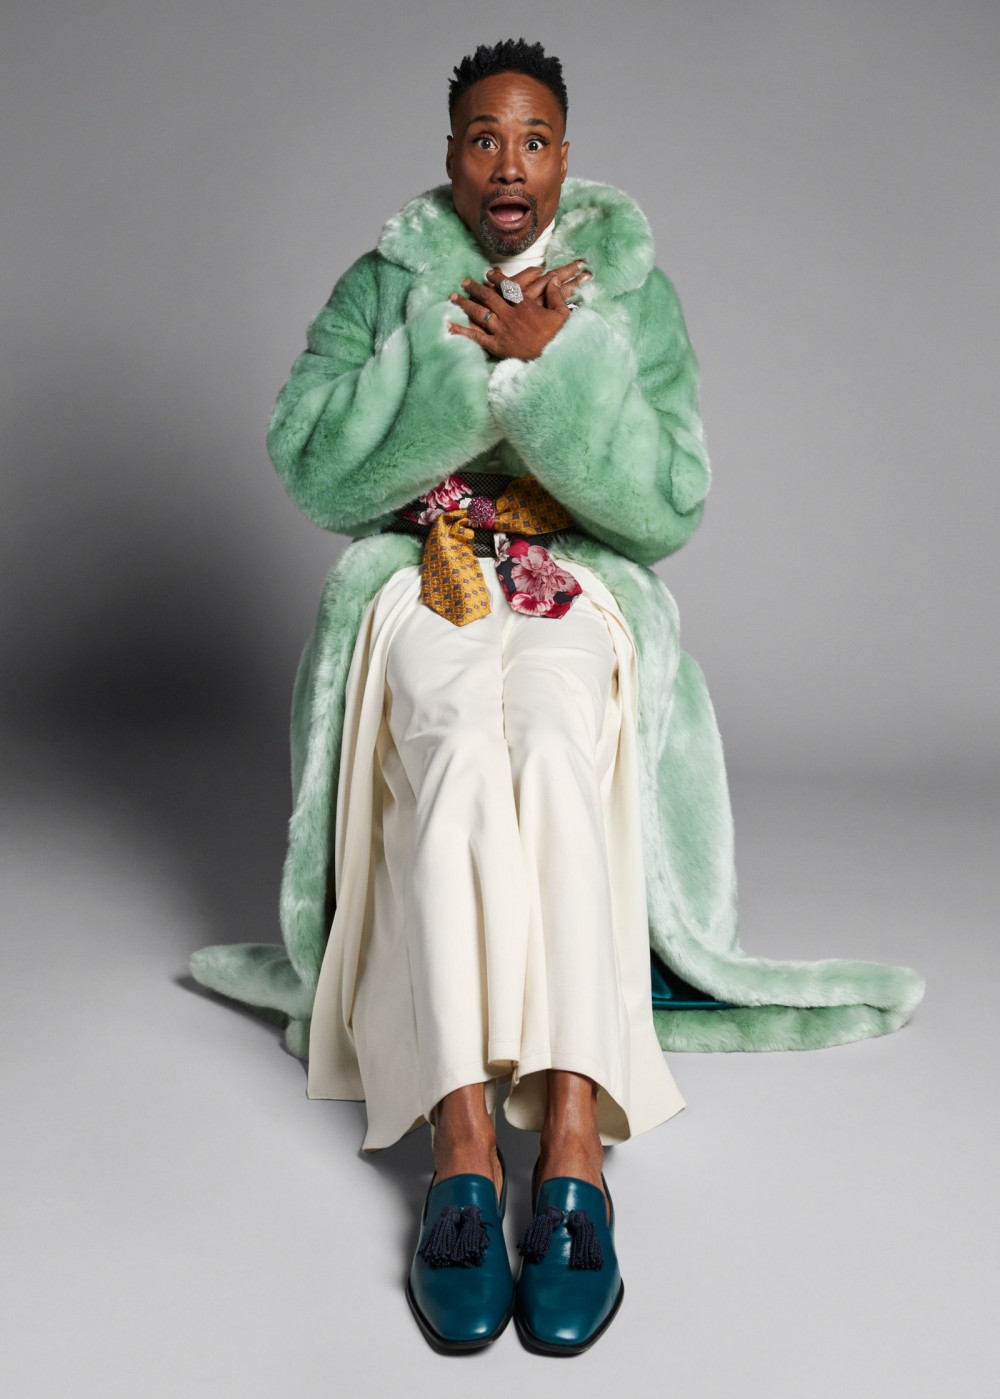 Billy Porter on the Joy of Heels and His Inclusive New Shoe Collection